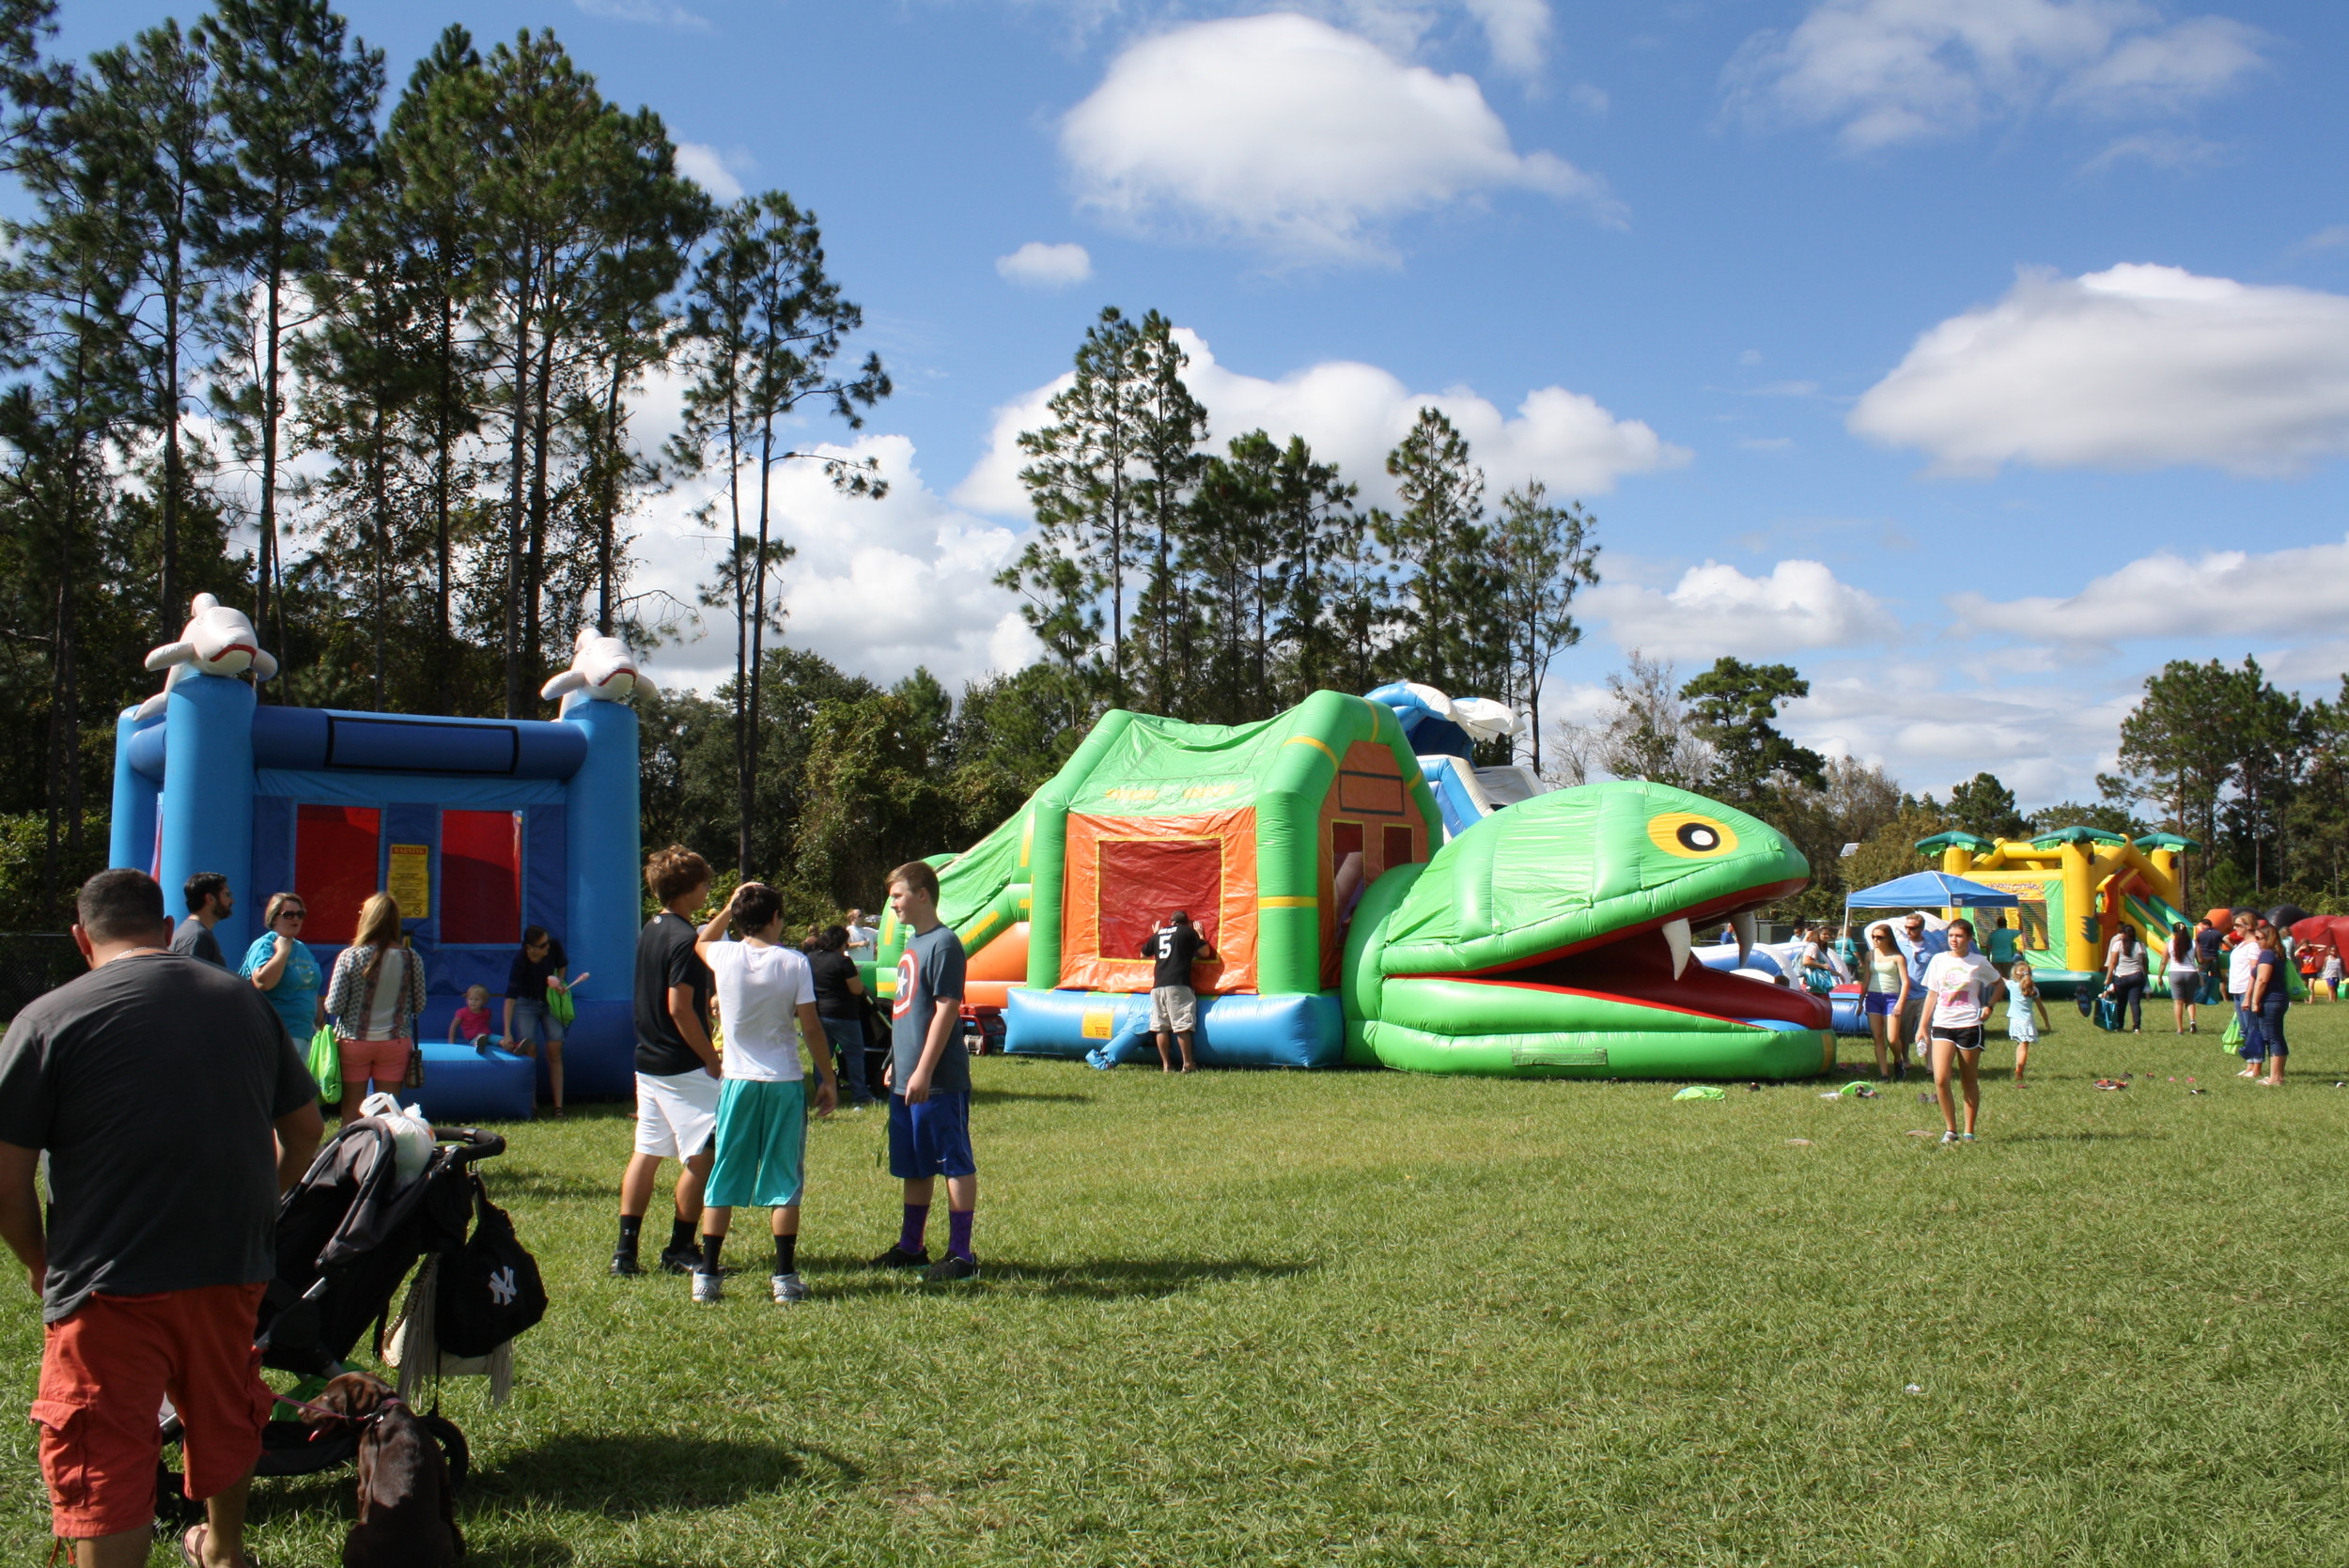 Kids could choose from seven different bounce houses.